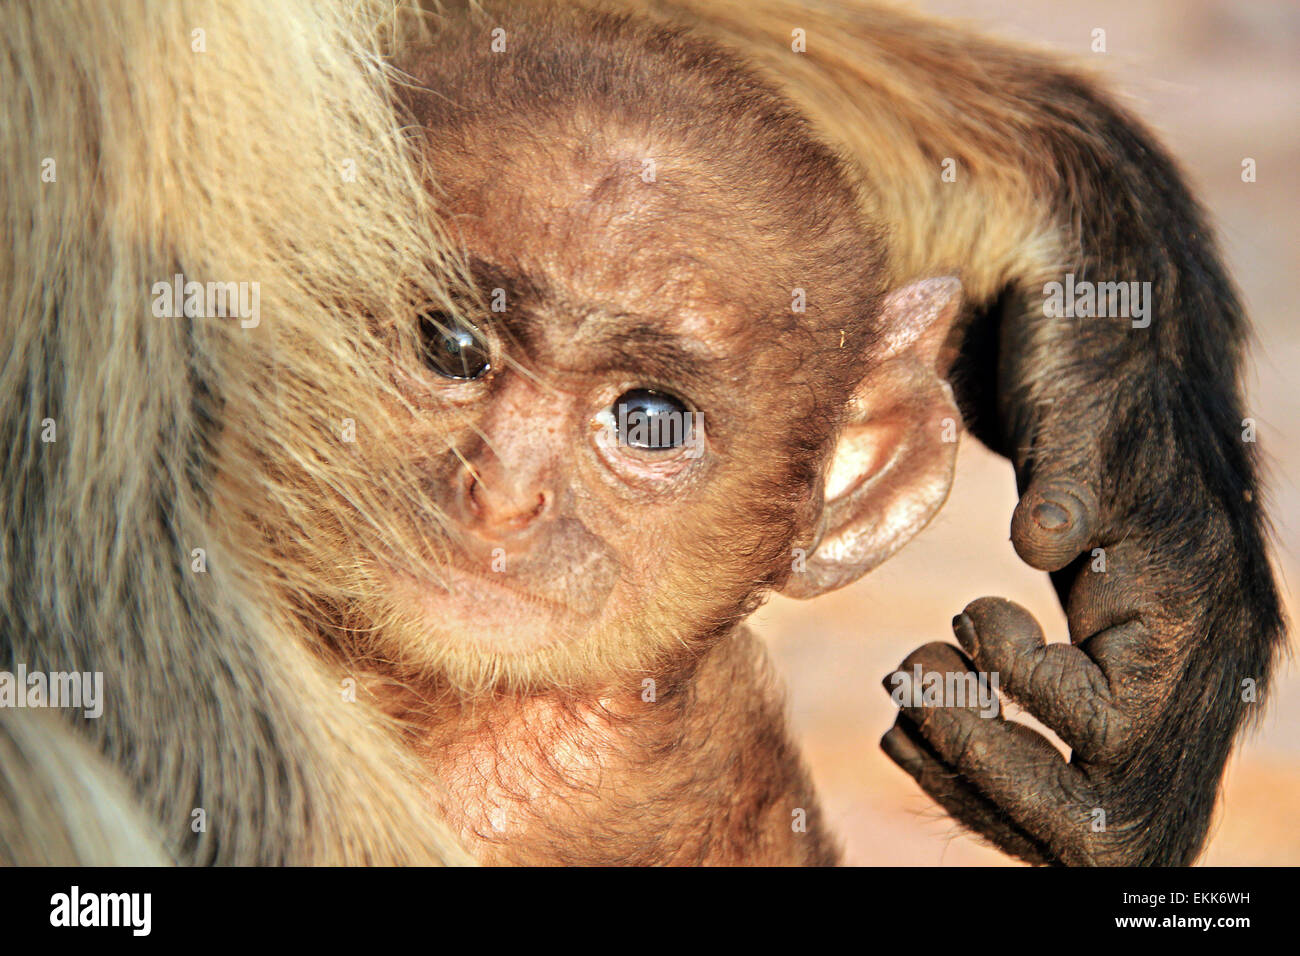 Close-up of a Baby of Gray Langur (Semnopithecus Entellus, aka Common Langur) in the Arms of the Mother, Looking into the Camera Stock Photo